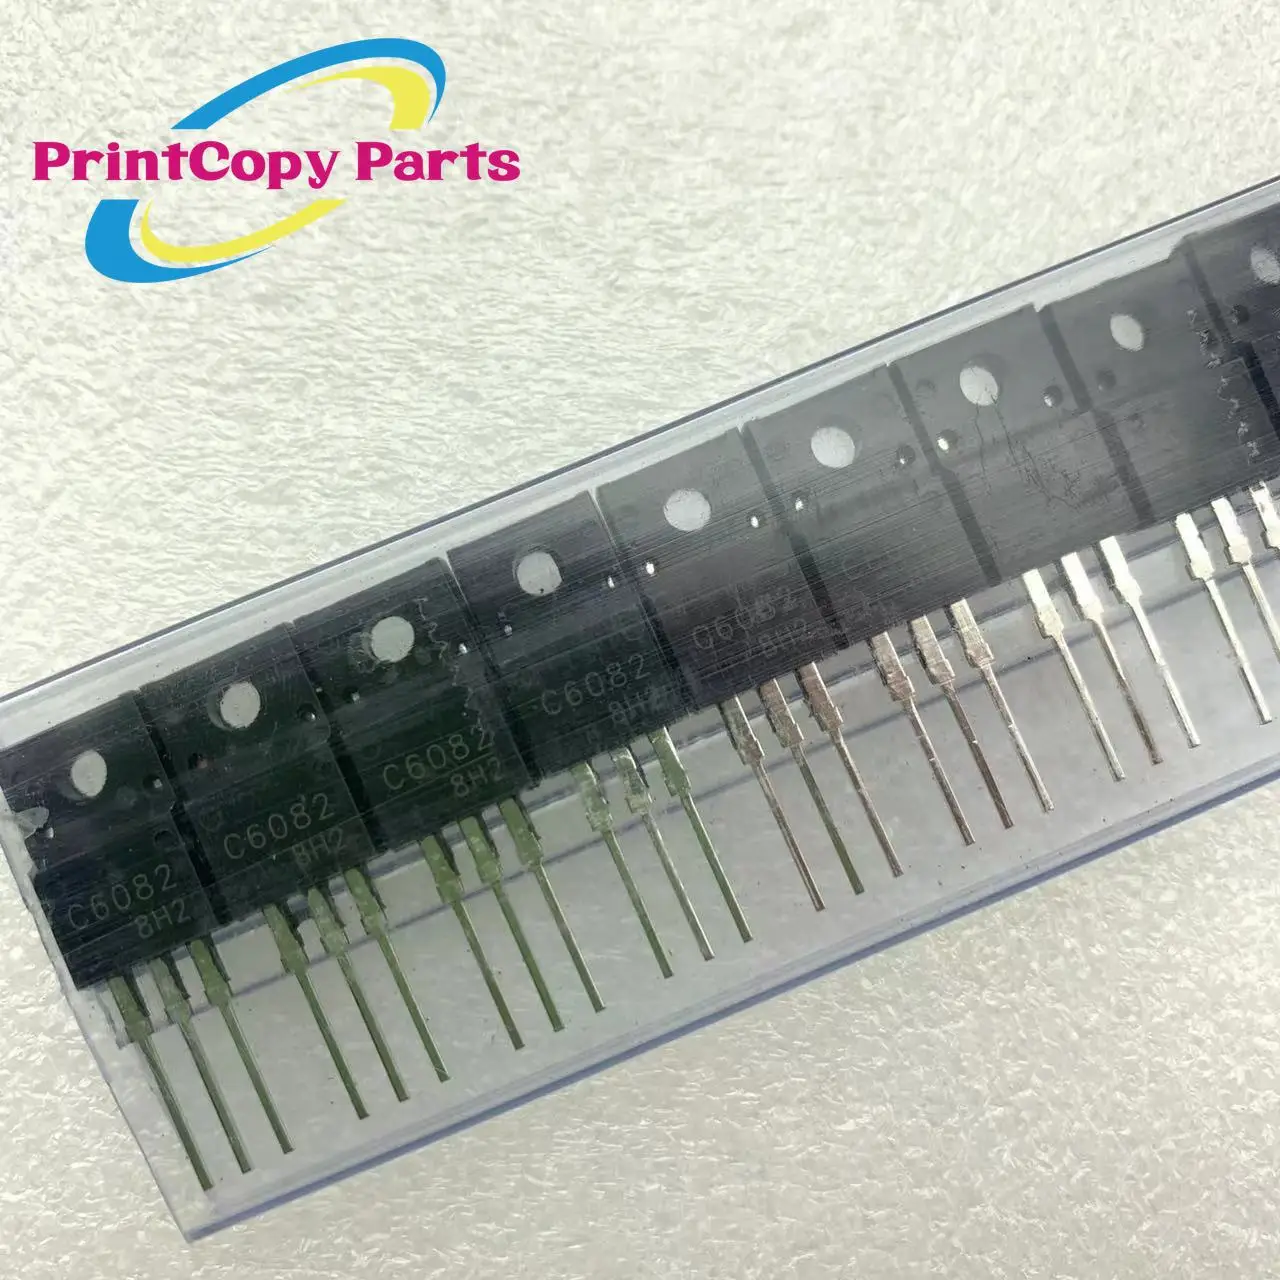 20Sets New TO-220 2SA2210 2SC6082 Transistor for Epson L1300 L1800 L4160 T50 L800 L805 Printer Motherboard Triode Free Shipping